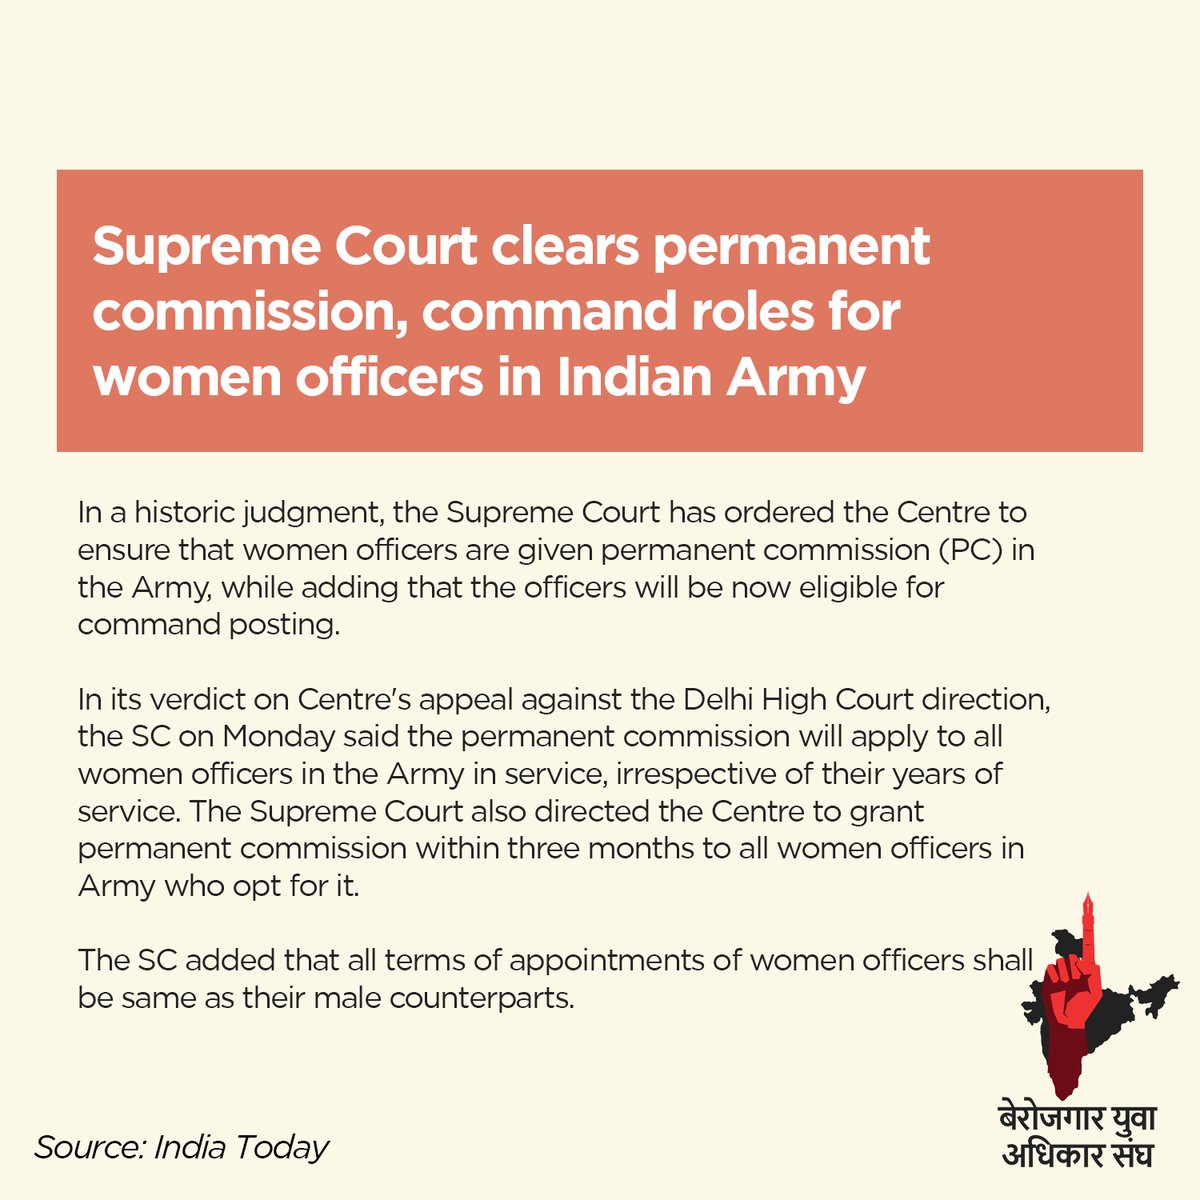 We welcome this decision of the #SupremeCourt and Invite all women to join #BYAS in our fight for equal and gainful employment 
#मैंबेरोजगारमोदीजिम्मेदार #मैंबेरोजगारयोगीजिम्मेदार #EmploymentForAll